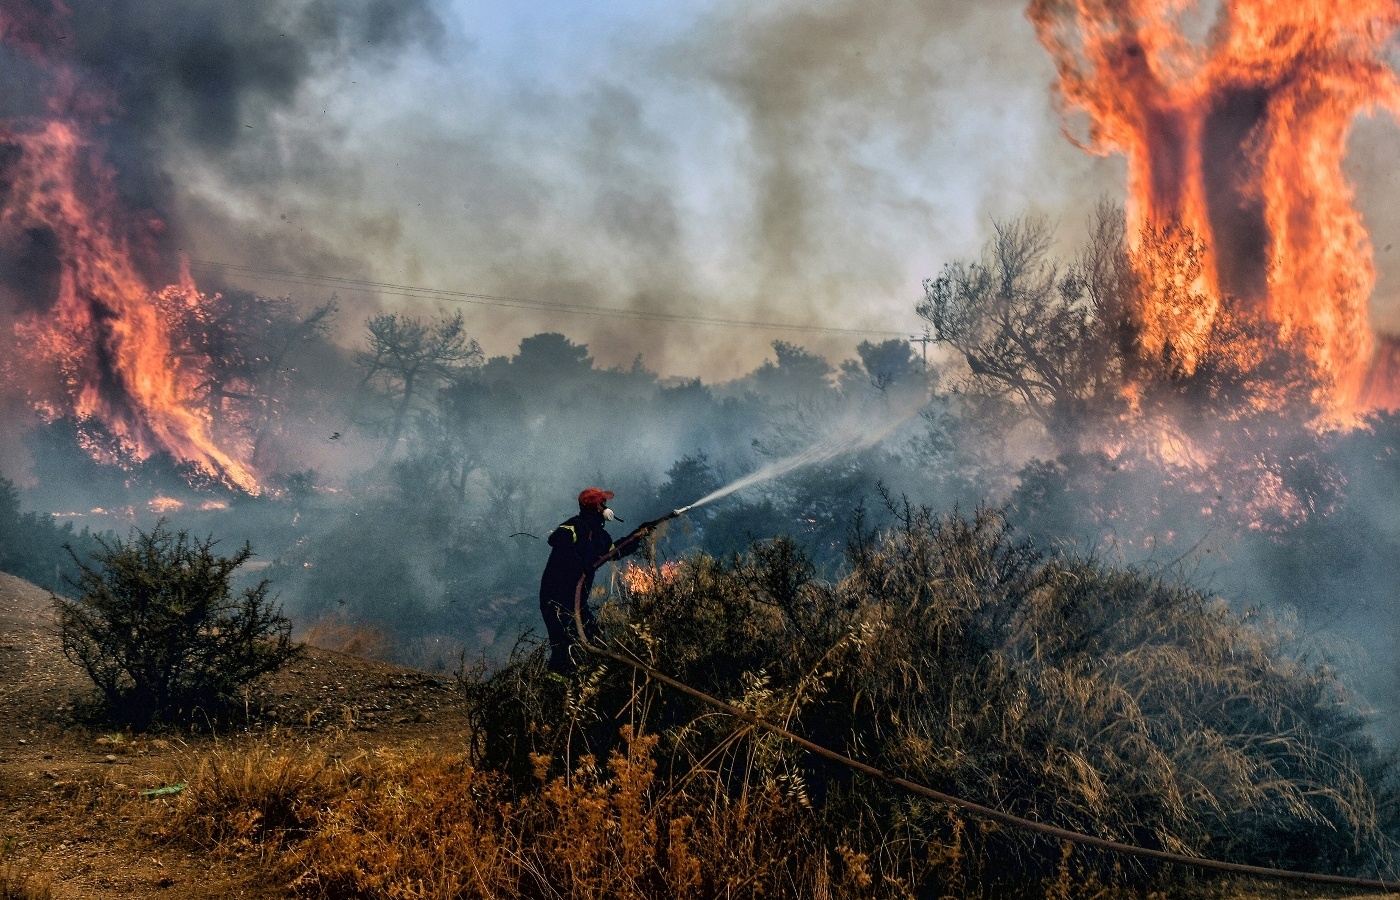 A fireman douses flames on a wildfire in Greece. 